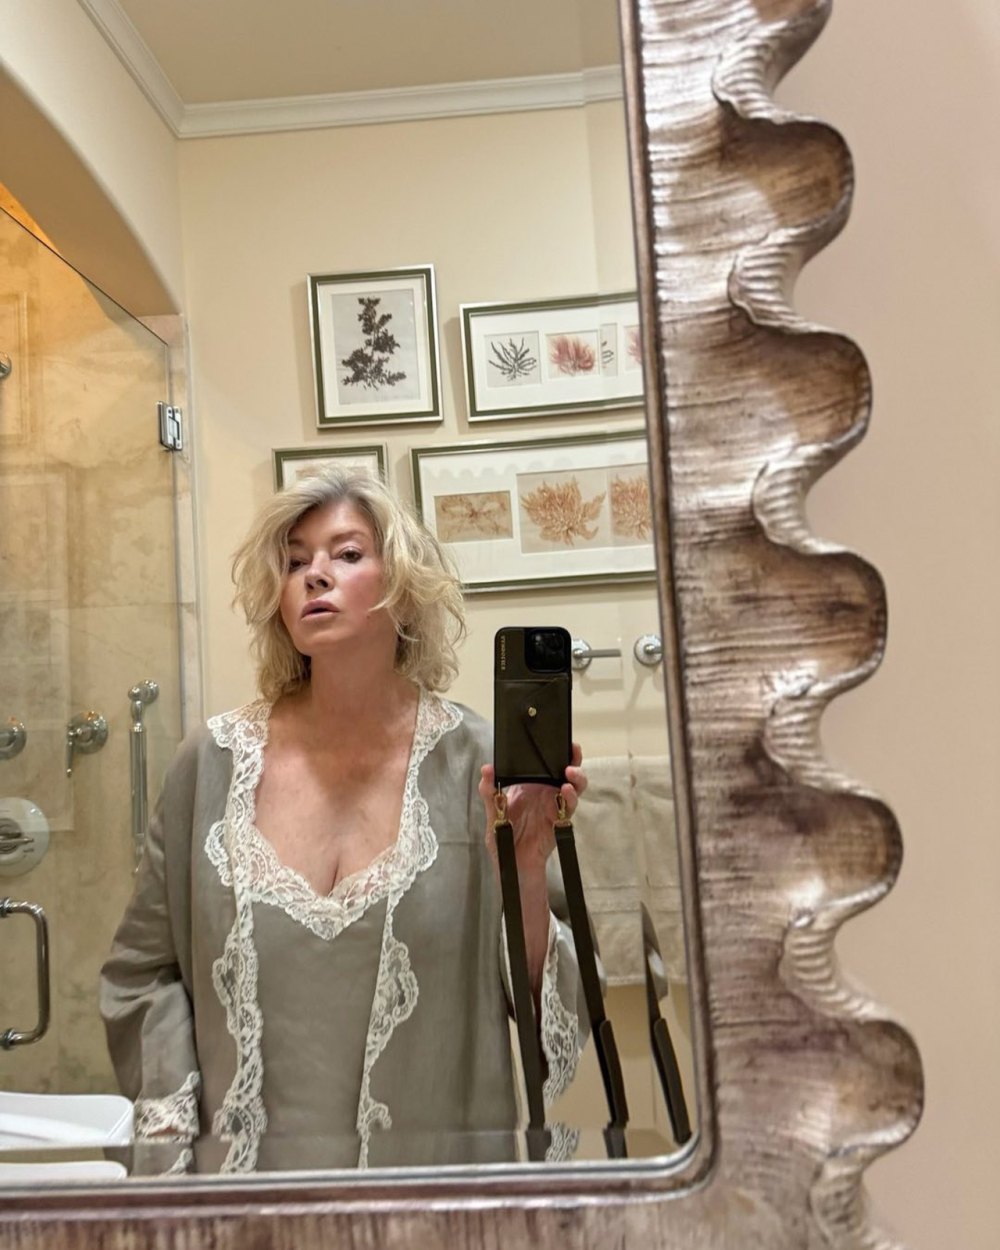 Martha Stewart Shows Off Her ‘Beautiful’ Nightgown in Sultry Selfie ...